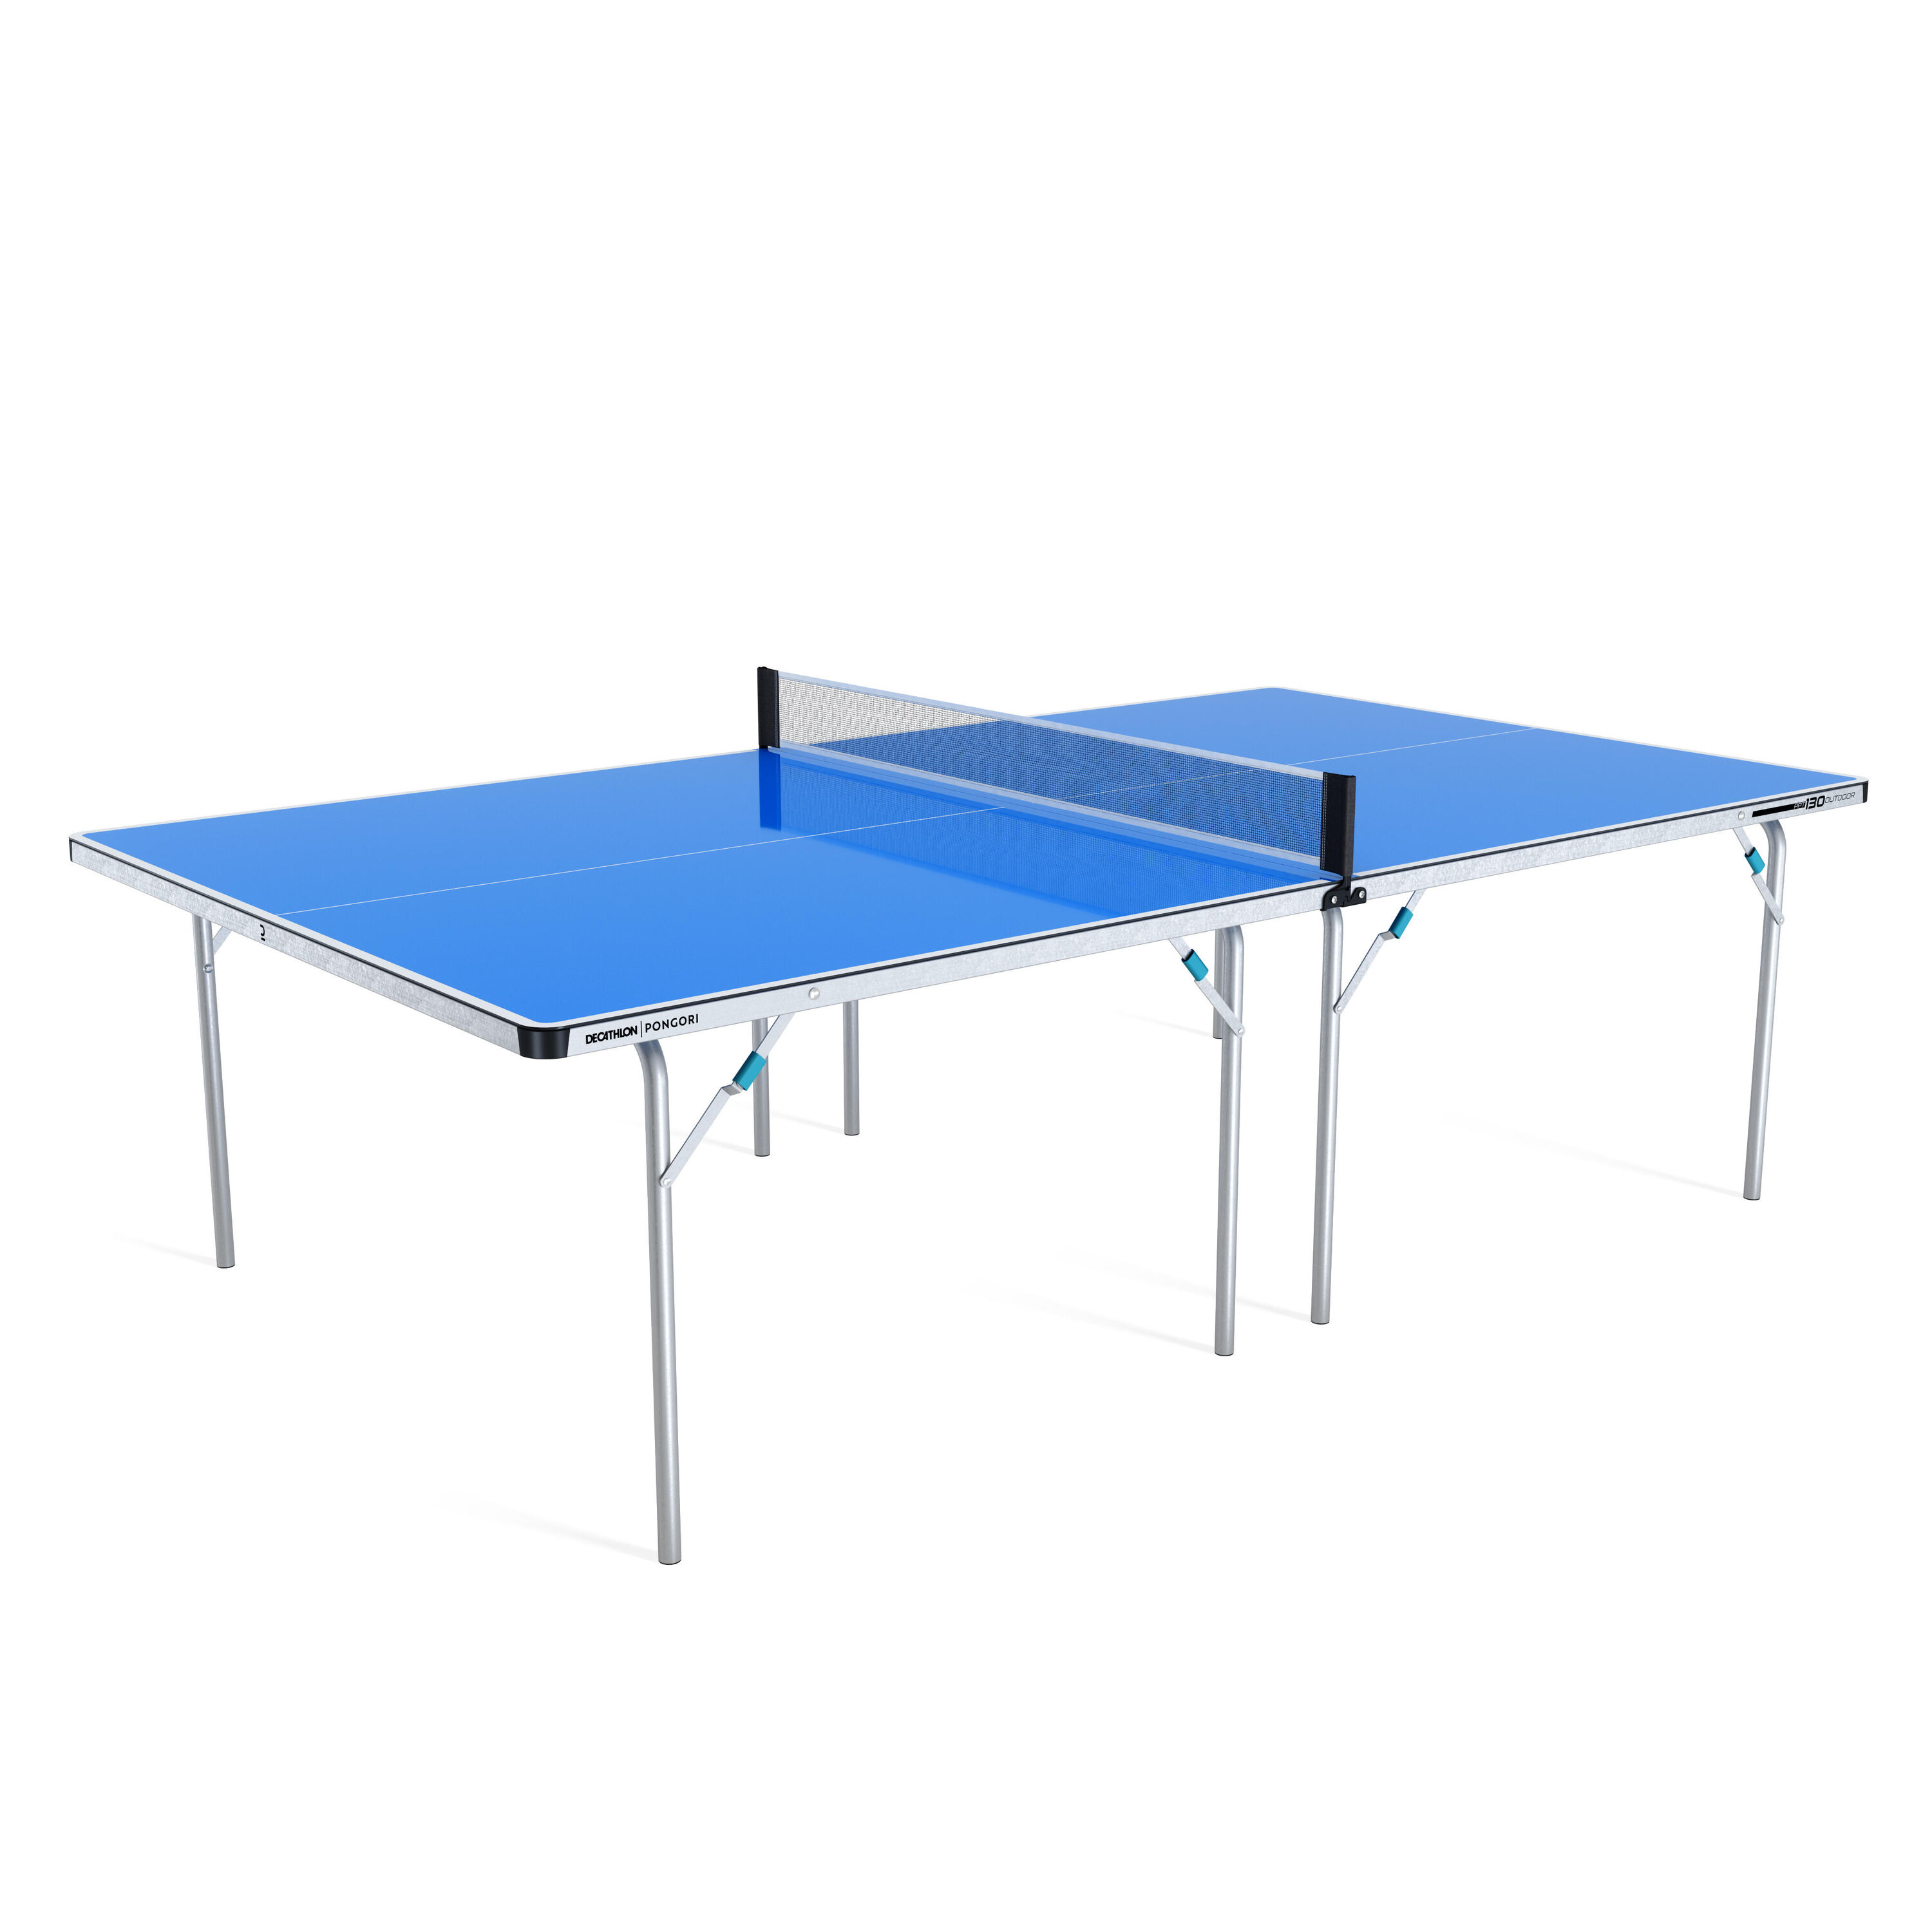 PONGORI Outdoor Table Tennis Table PPT 130 - Blue